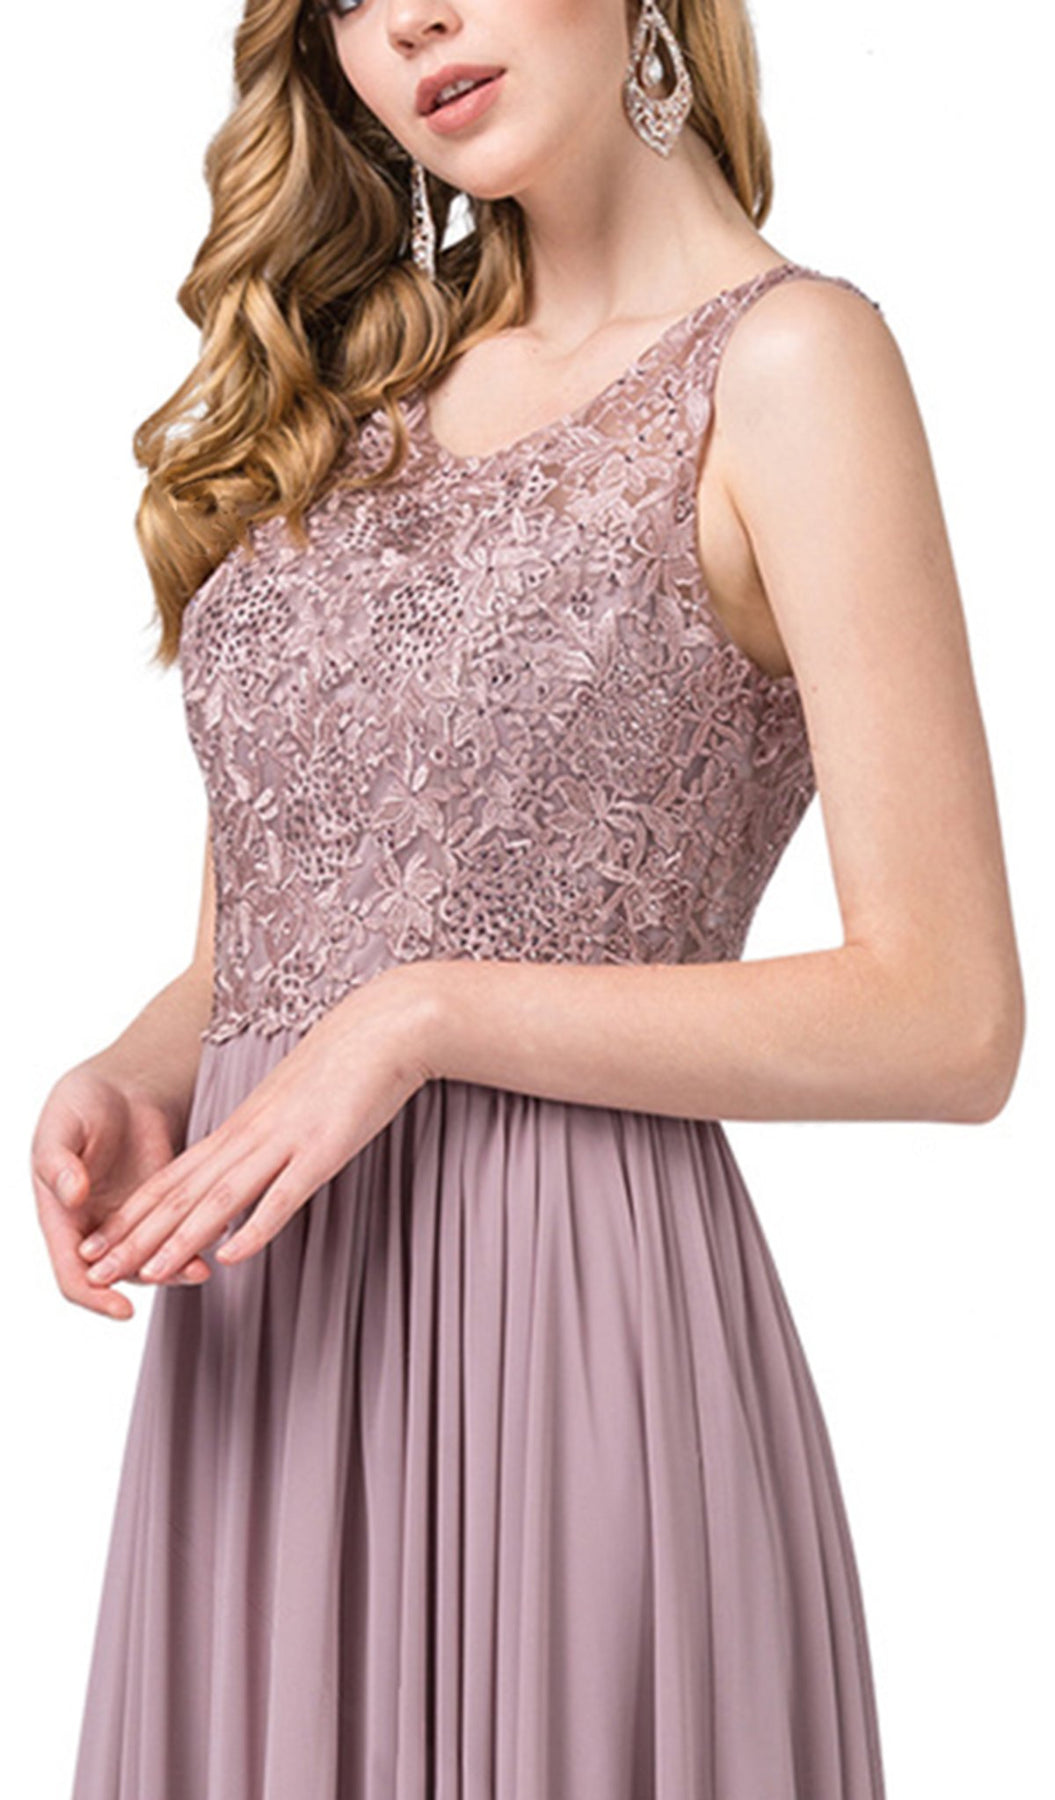 Dancing Queen - 2553 Beaded Lace Bodice A-Line Gown In Pink